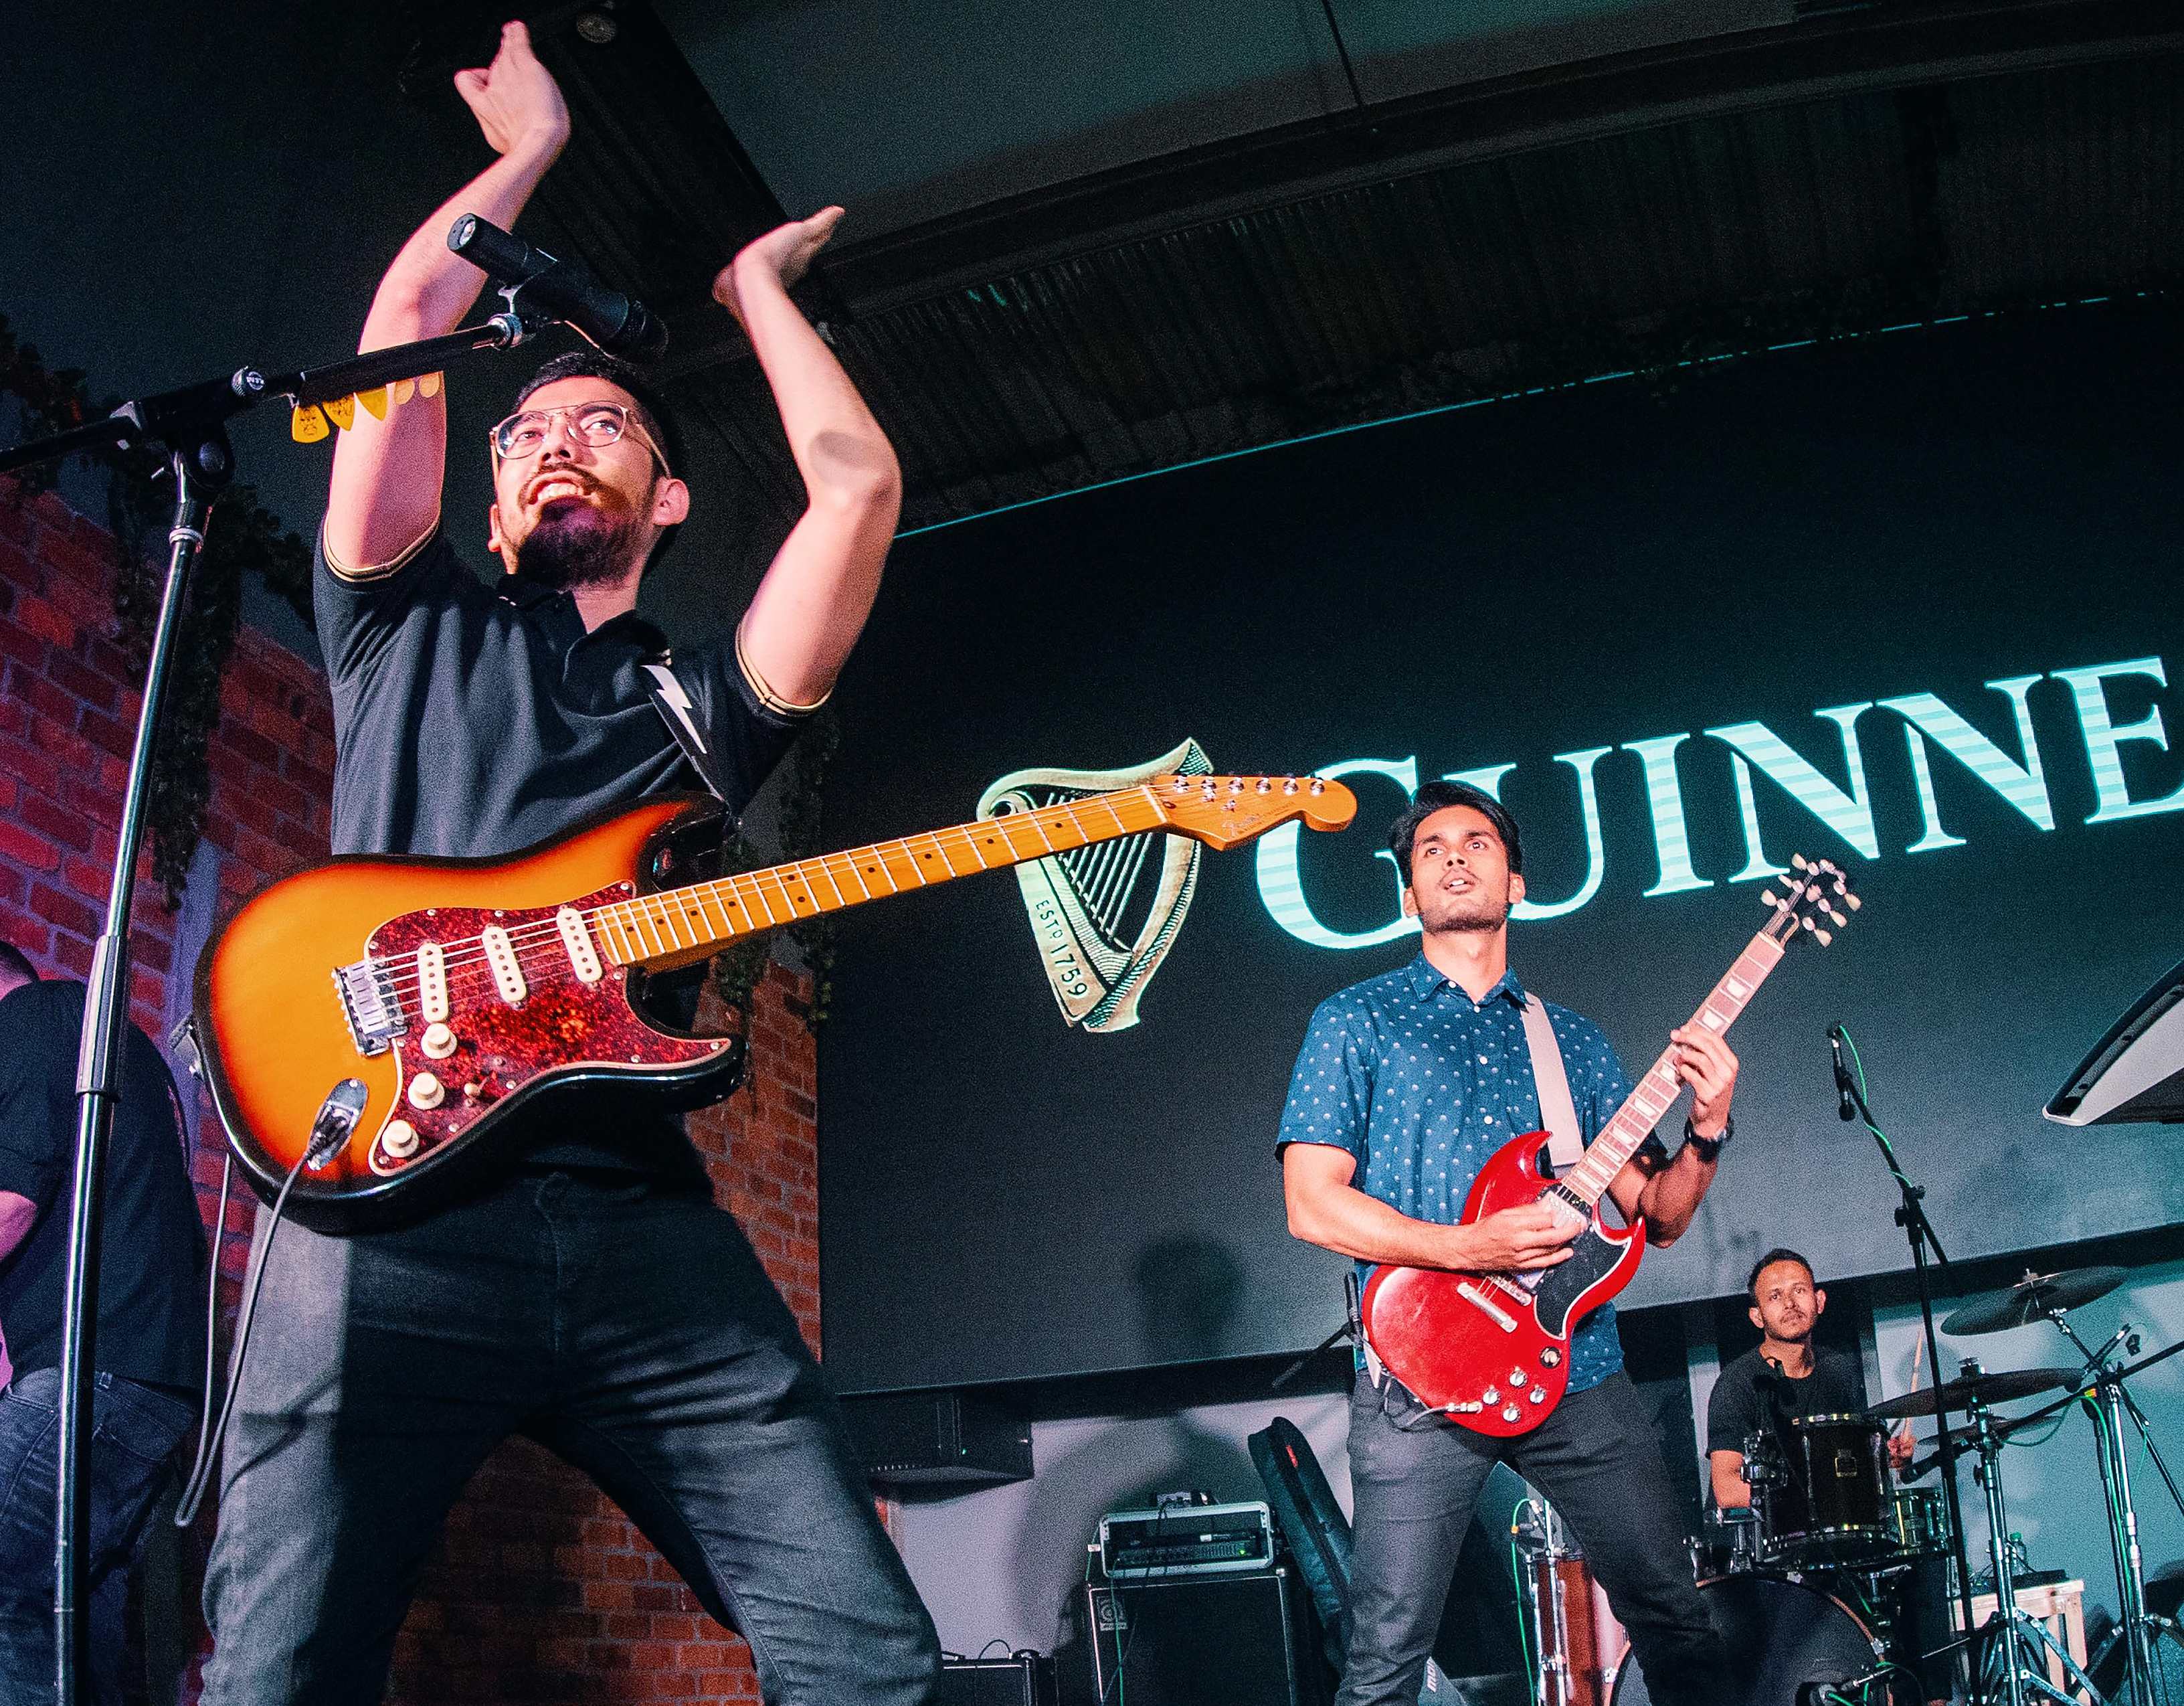 Kyoto Protocol performing at Guinness Flavour by Fire-v2